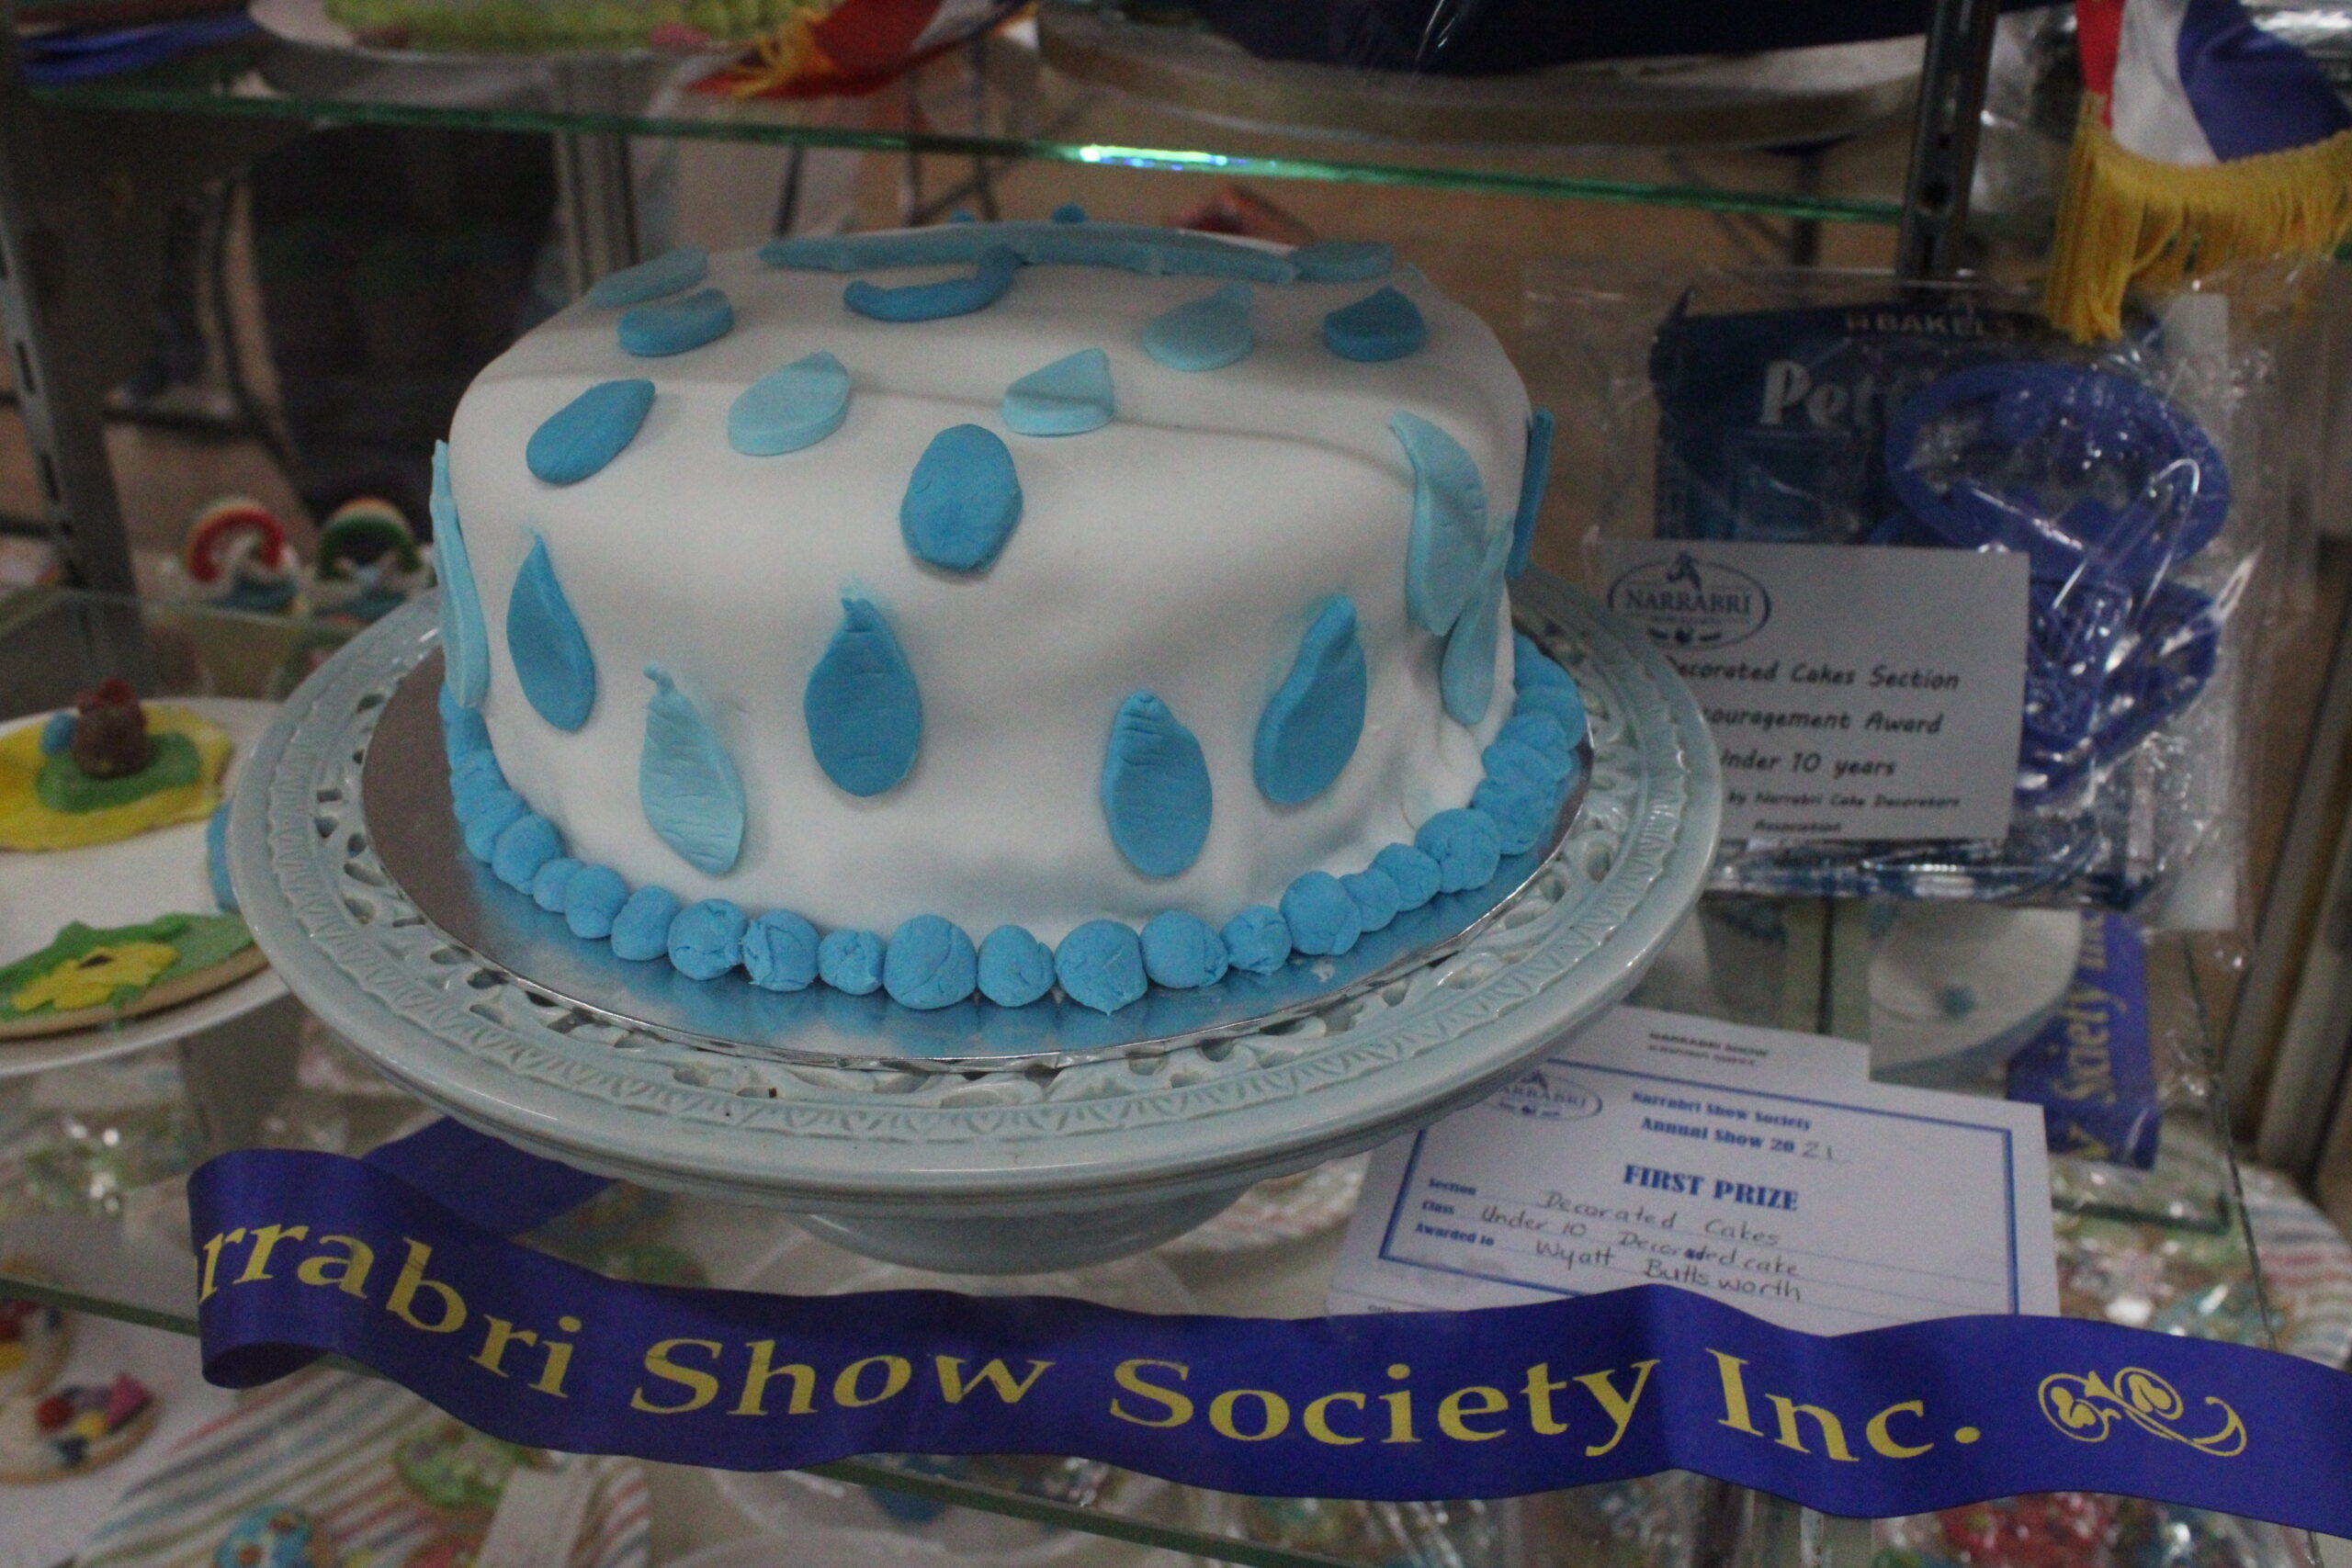 Wyatt Butterworth was awarded first prize in the under 10 decorated cake class.